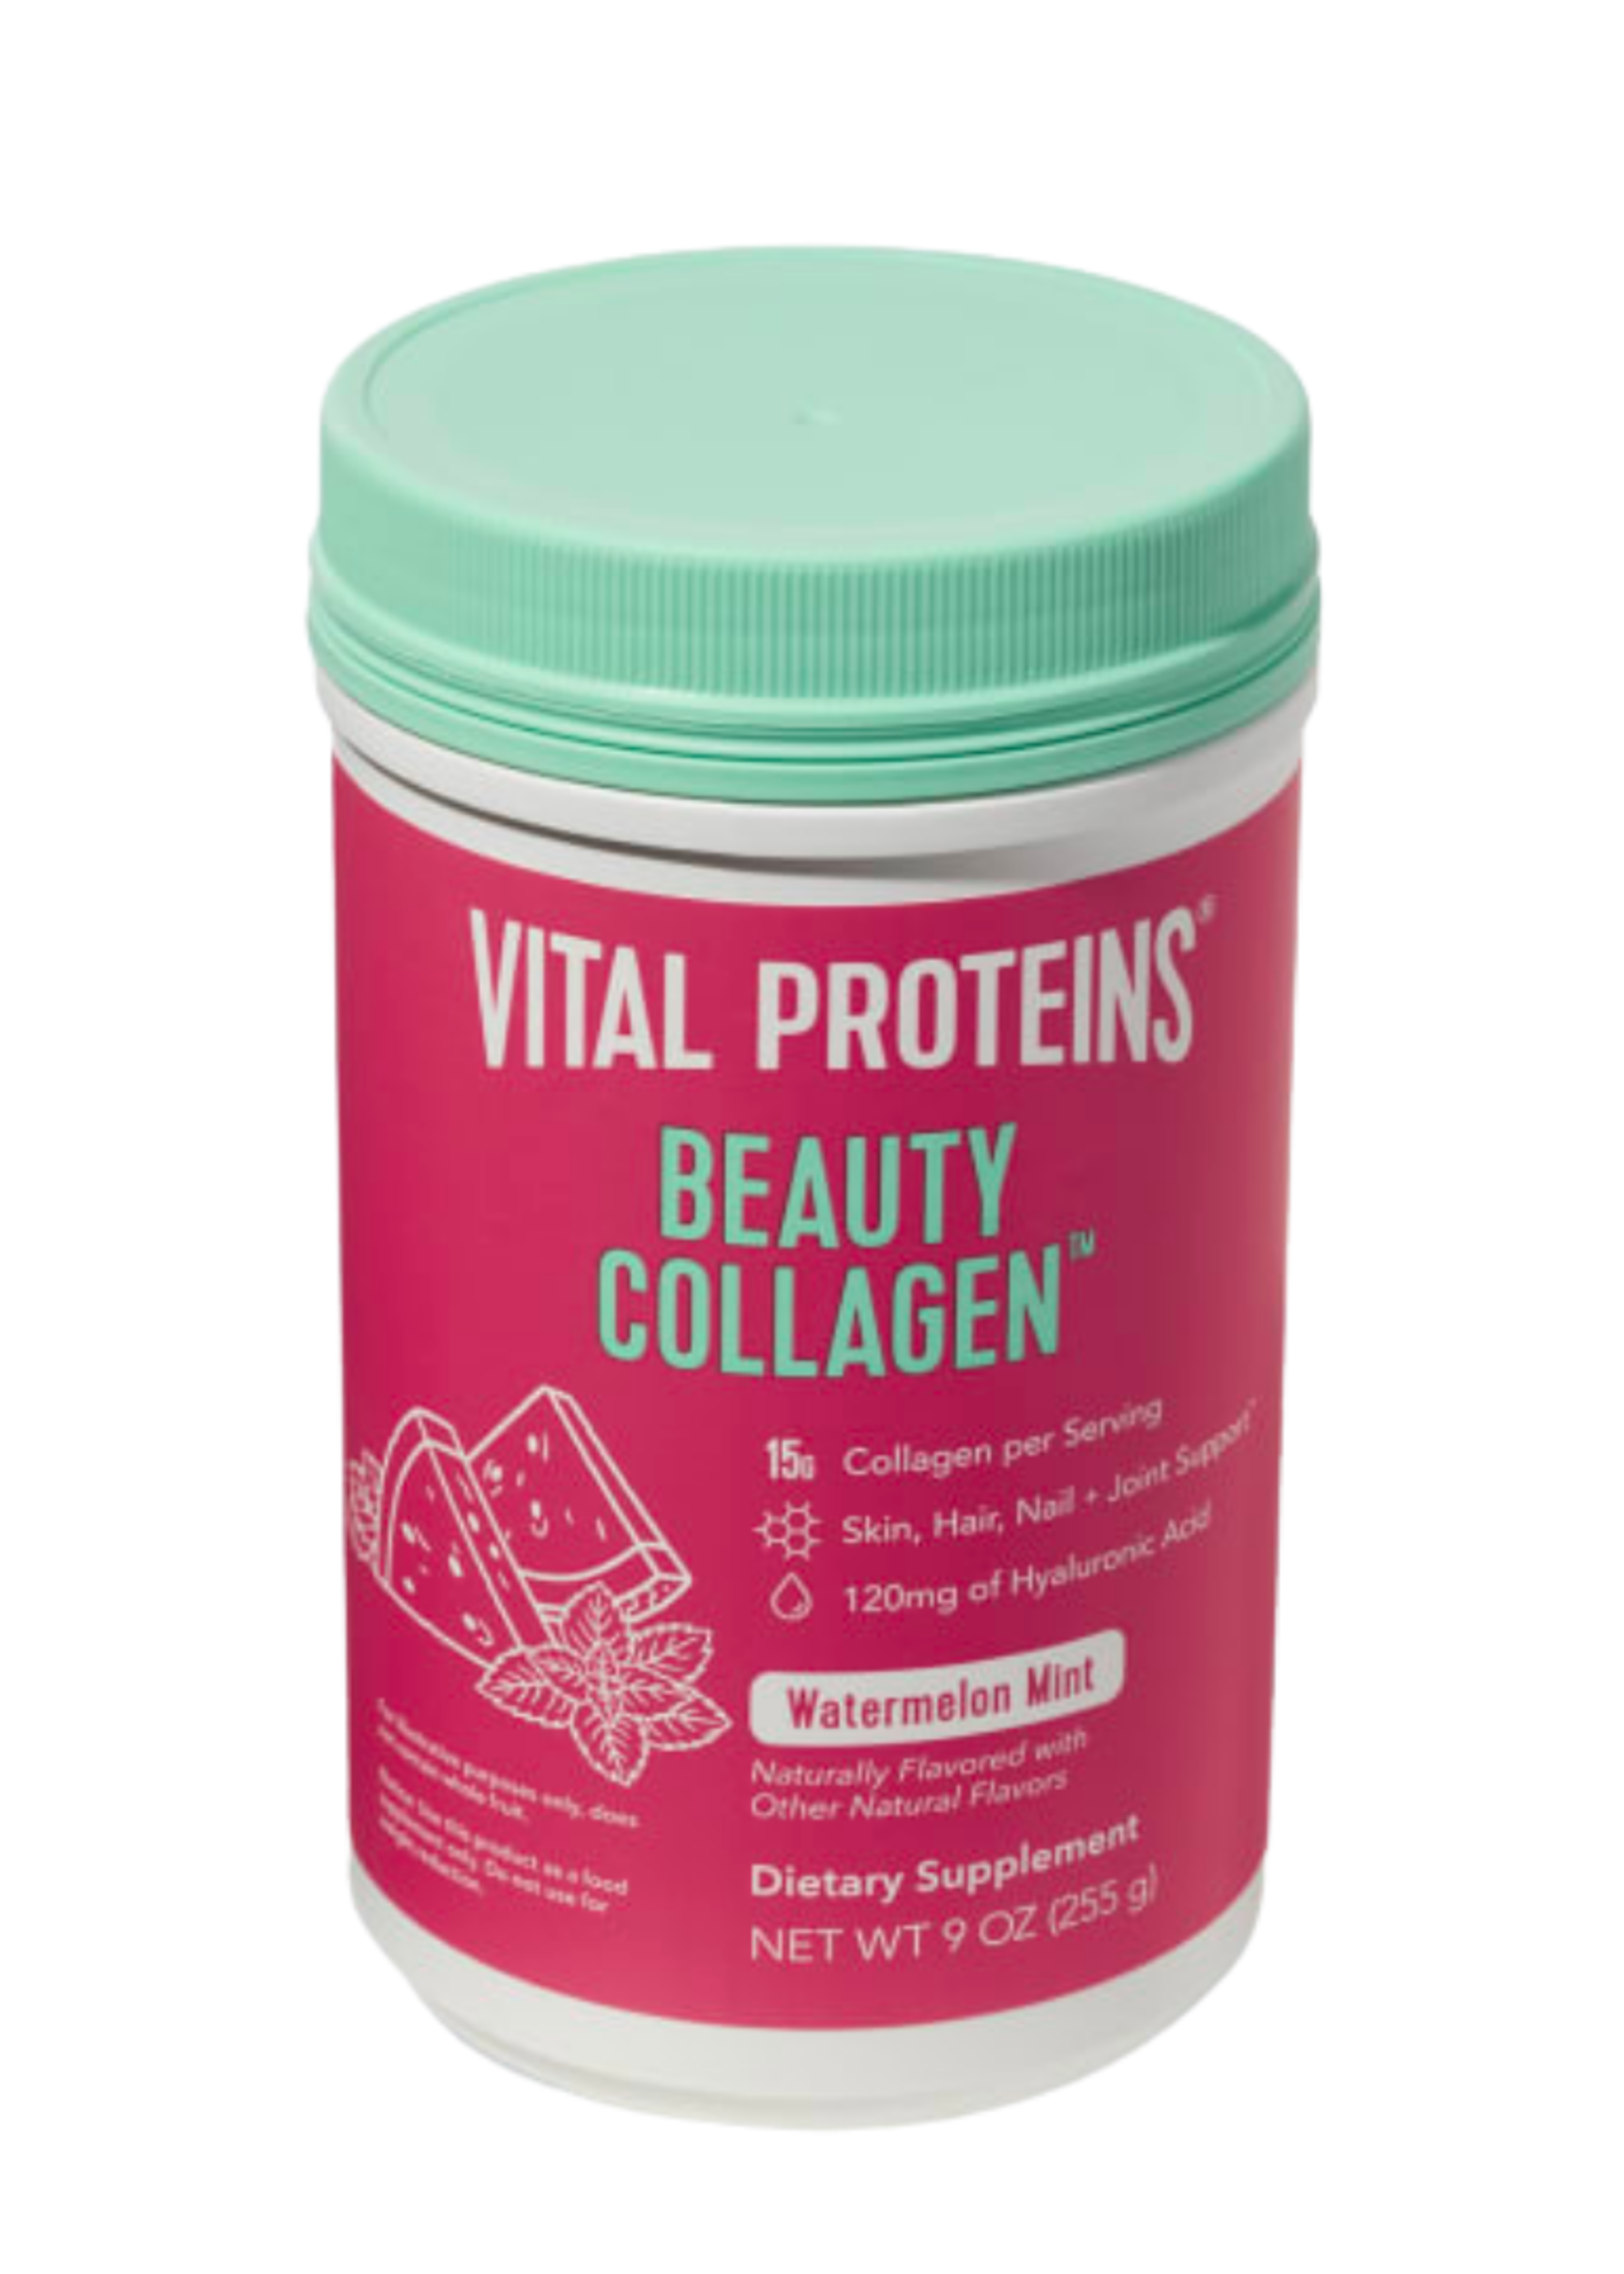 Vital Proteins Vital Proteins Beauty Collagen